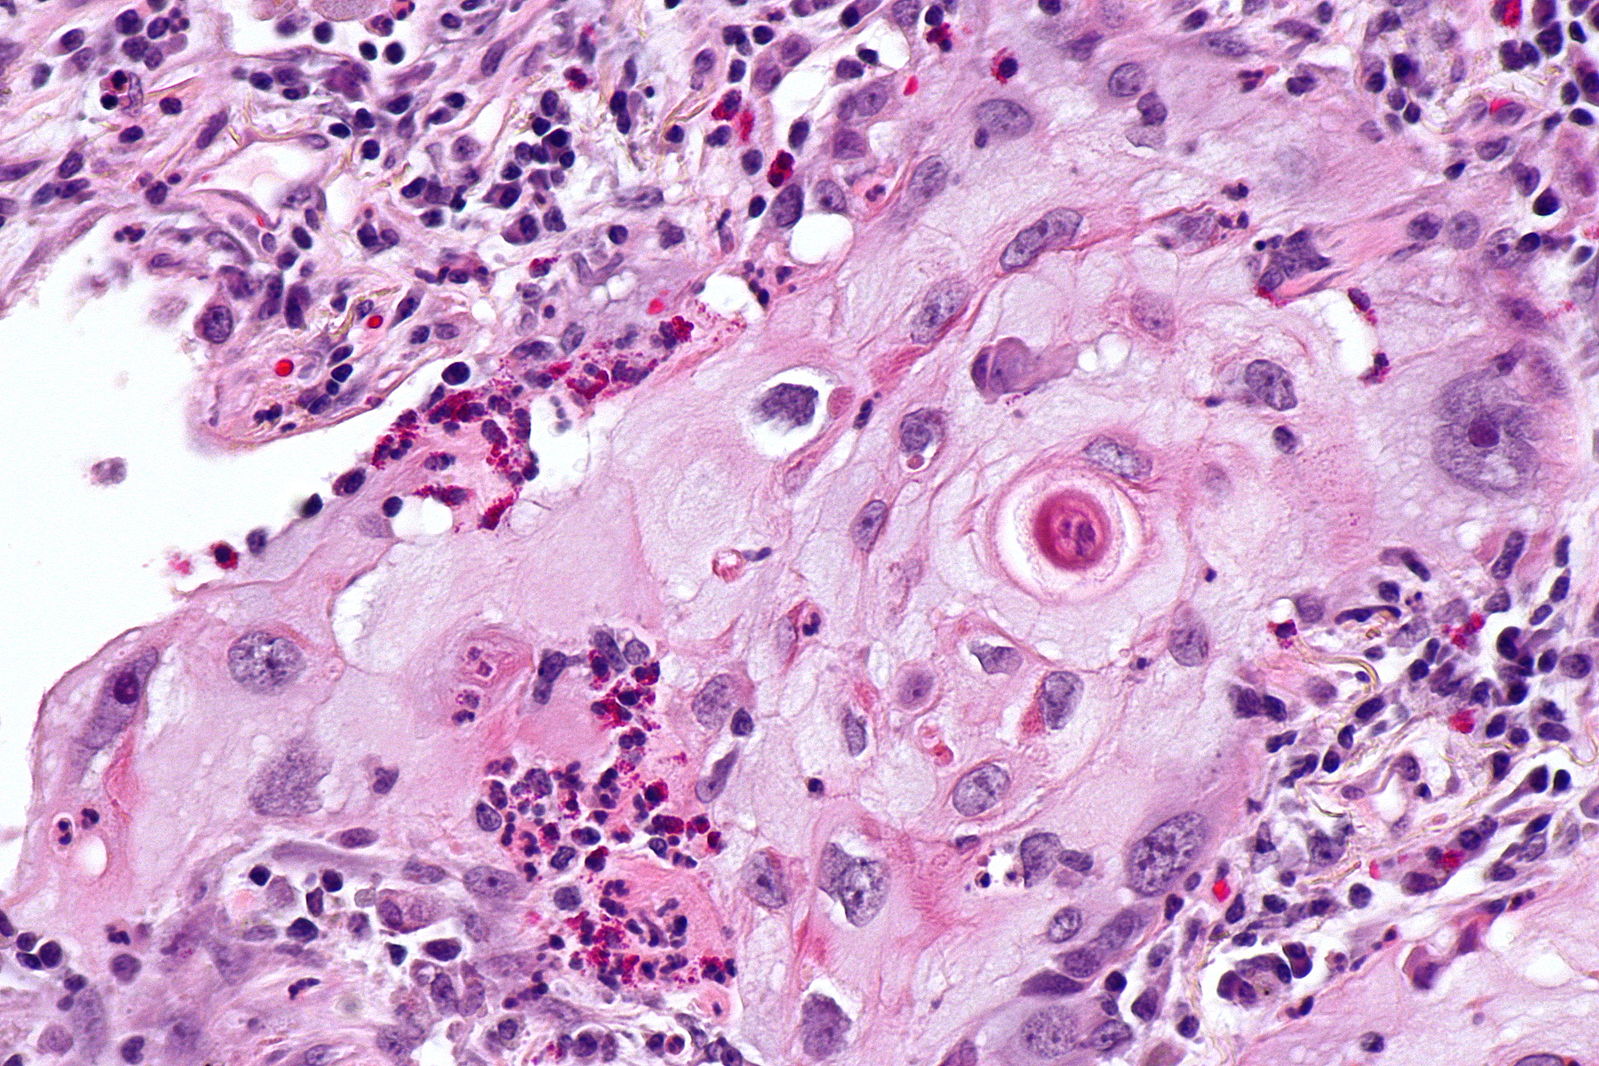 Micropathology: Squamous cell carcinoma of the lung. H&E stain.